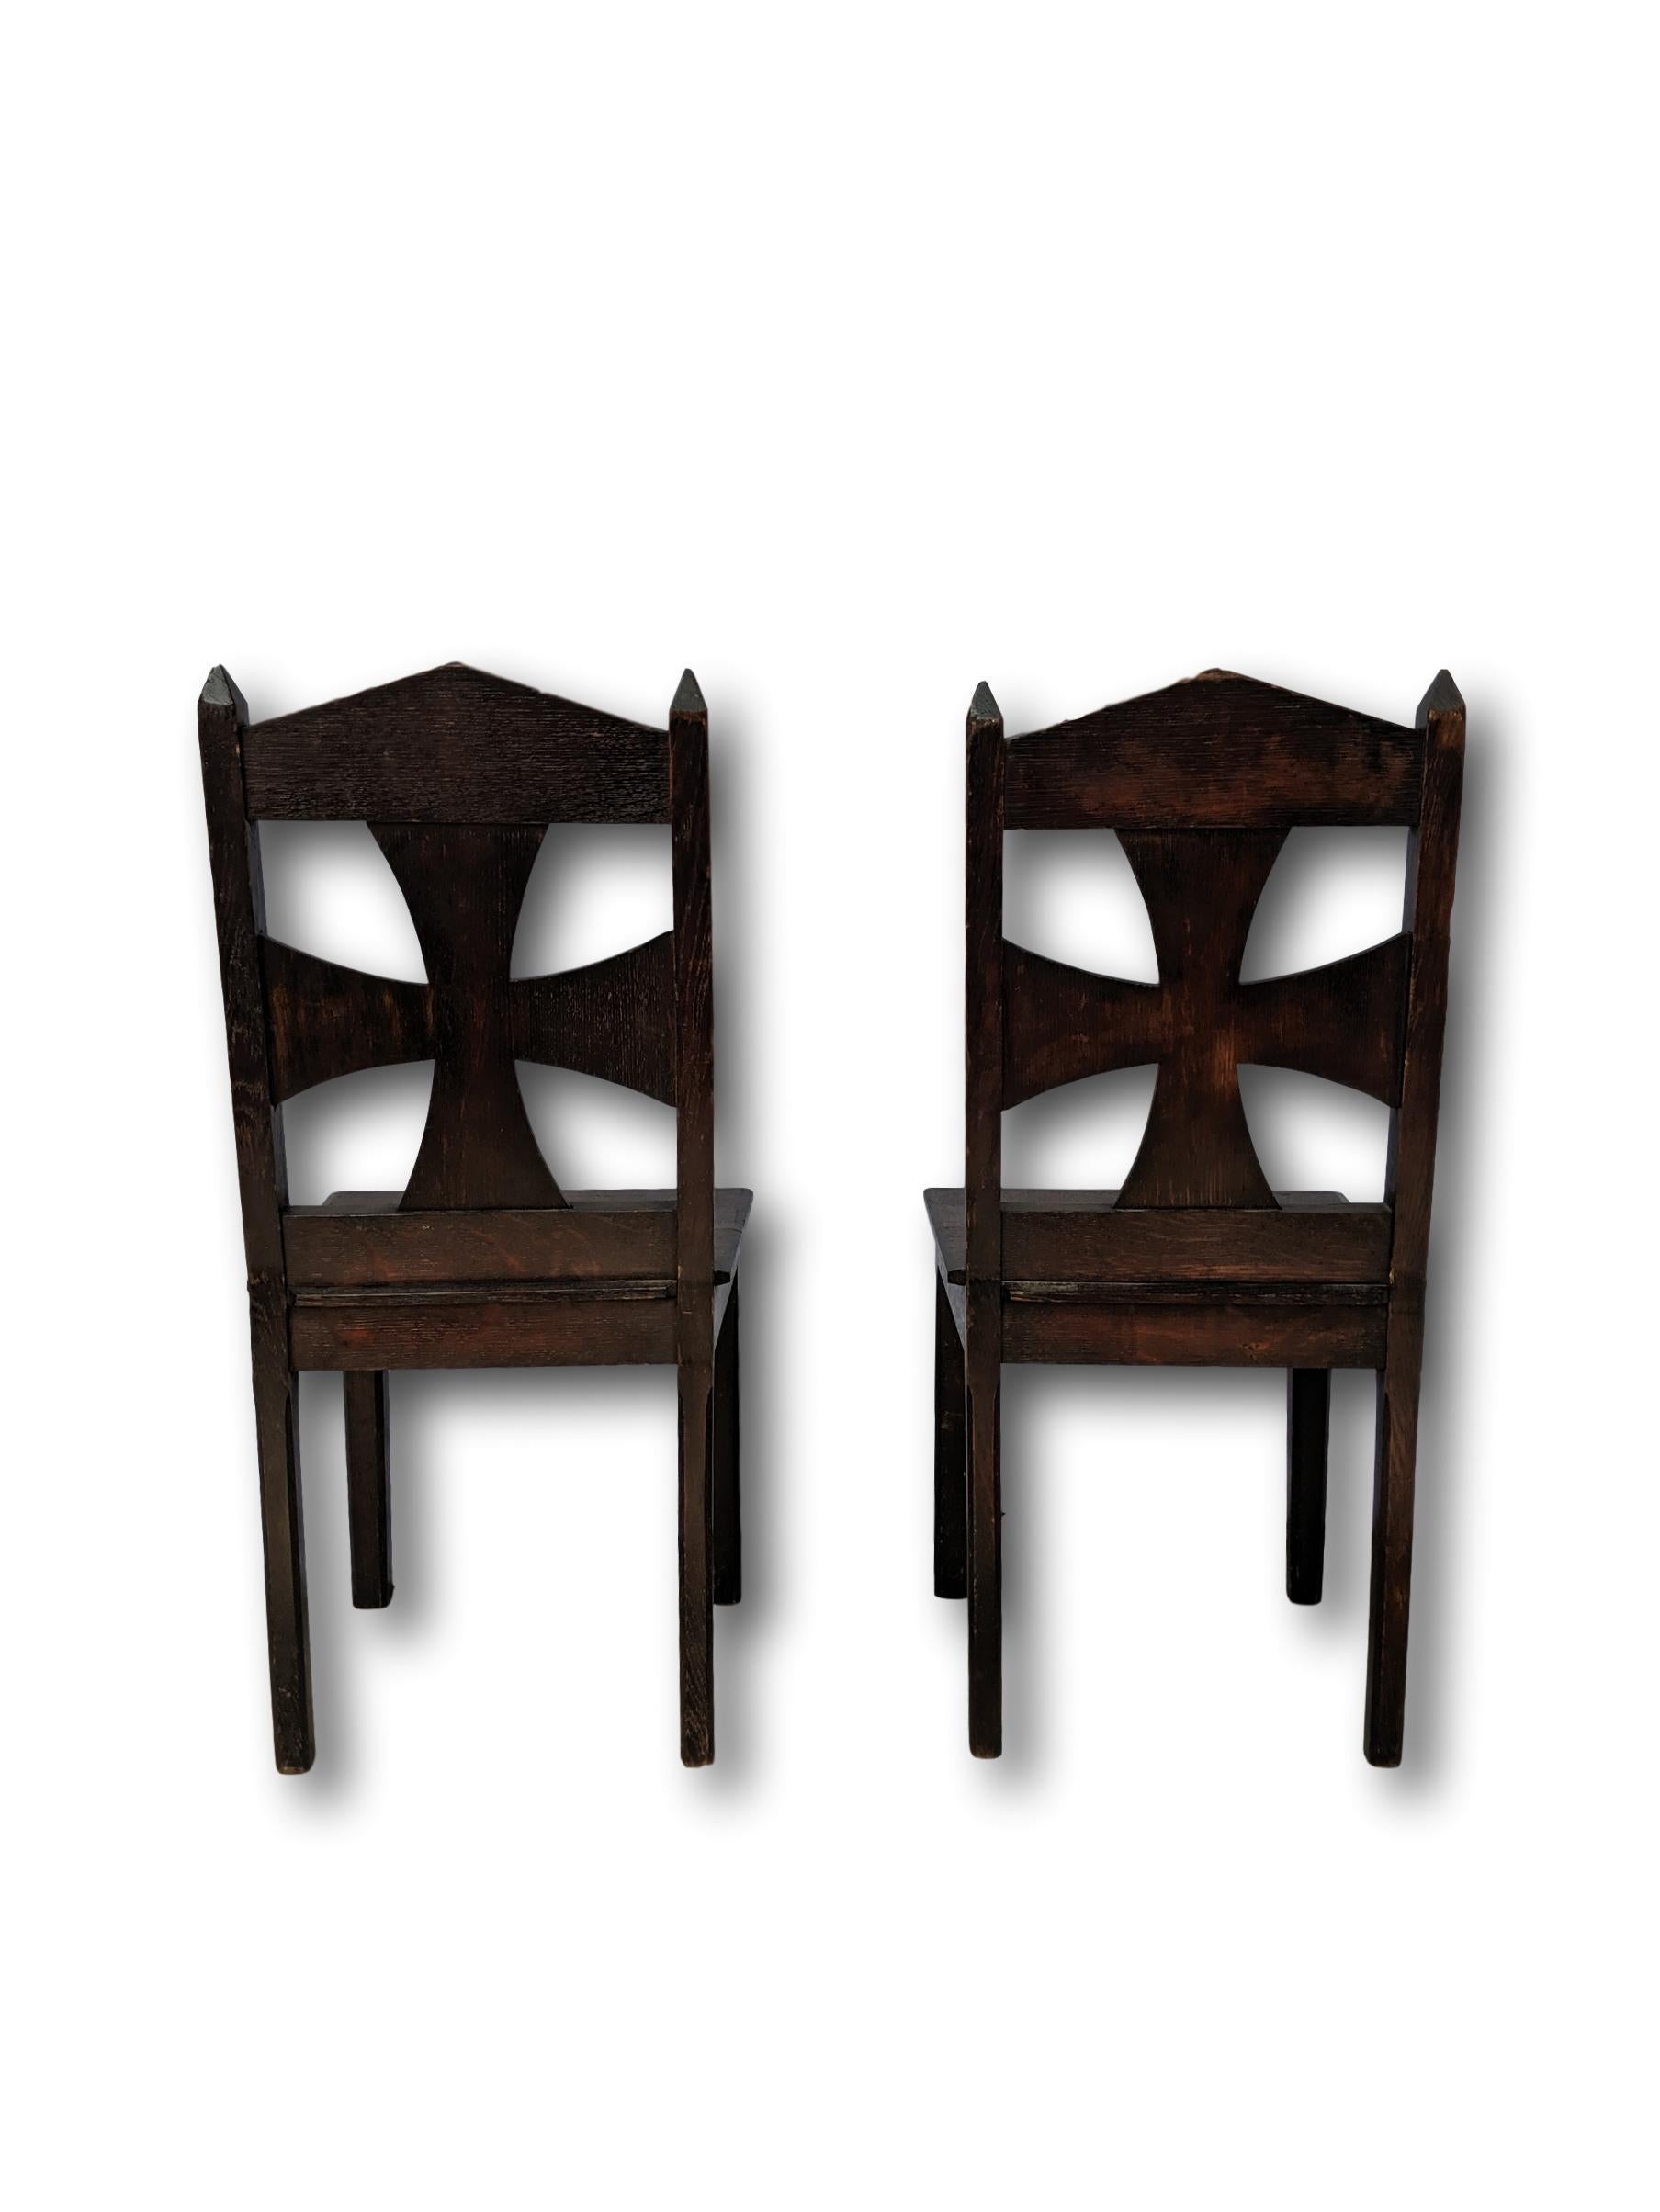 Arts and Crafts Pair of Hand Carved Oak Gothic Chairs, Arts & Crafts Movement, Scottish